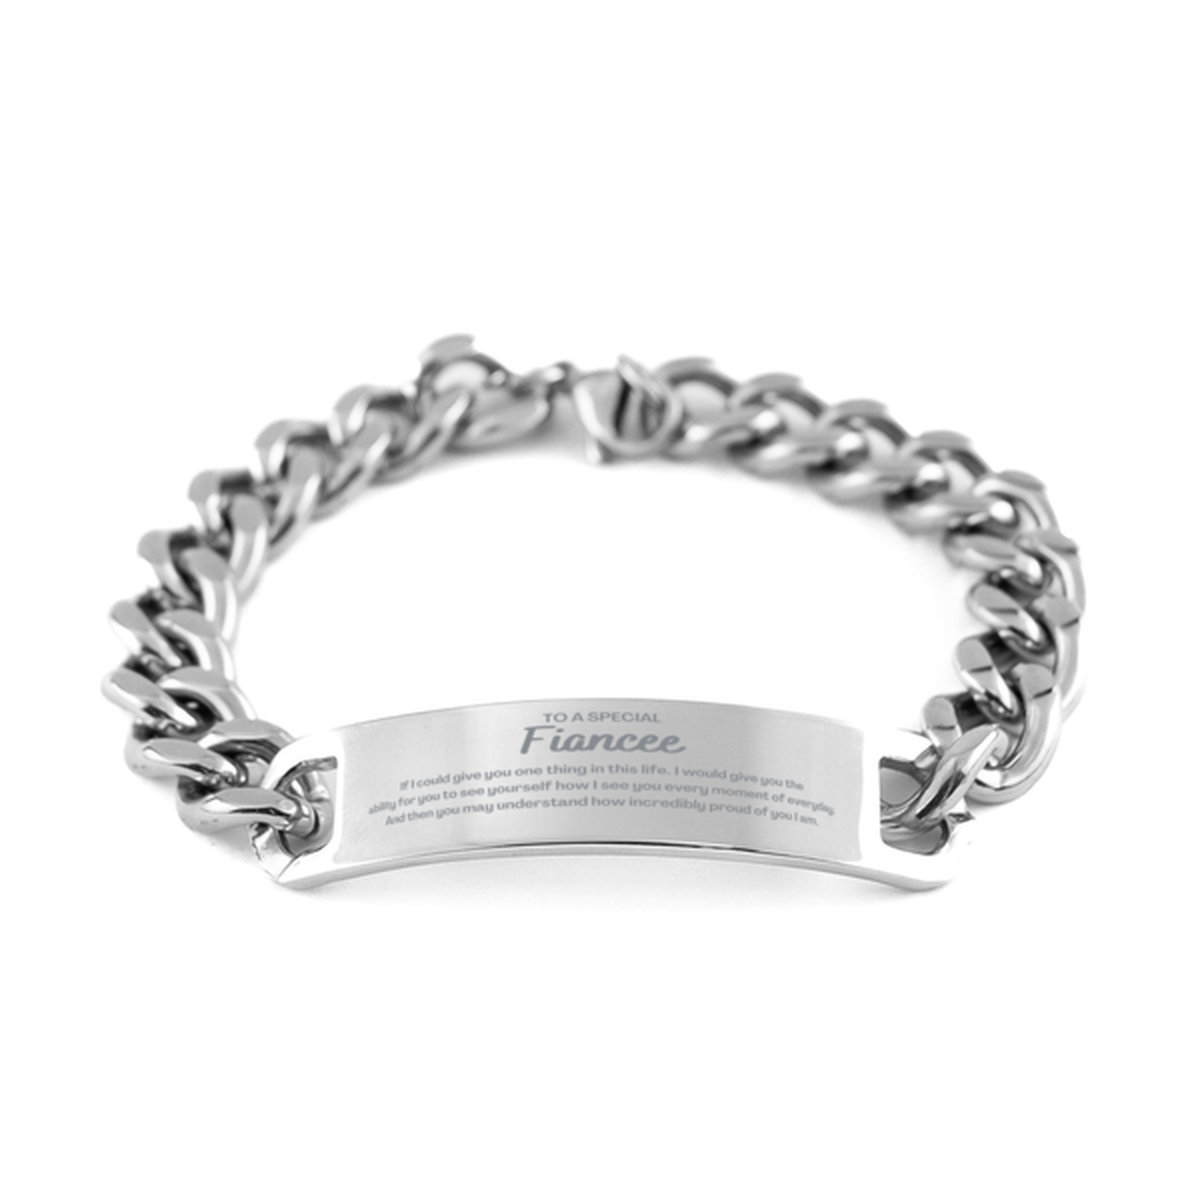 To My Fiancee Cuban Chain Stainless Steel Bracelet, Gifts For Fiancee Engraved, Inspirational Gifts for Christmas Birthday, Epic Gifts for Fiancee To A Special Fiancee how incredibly proud of you I am